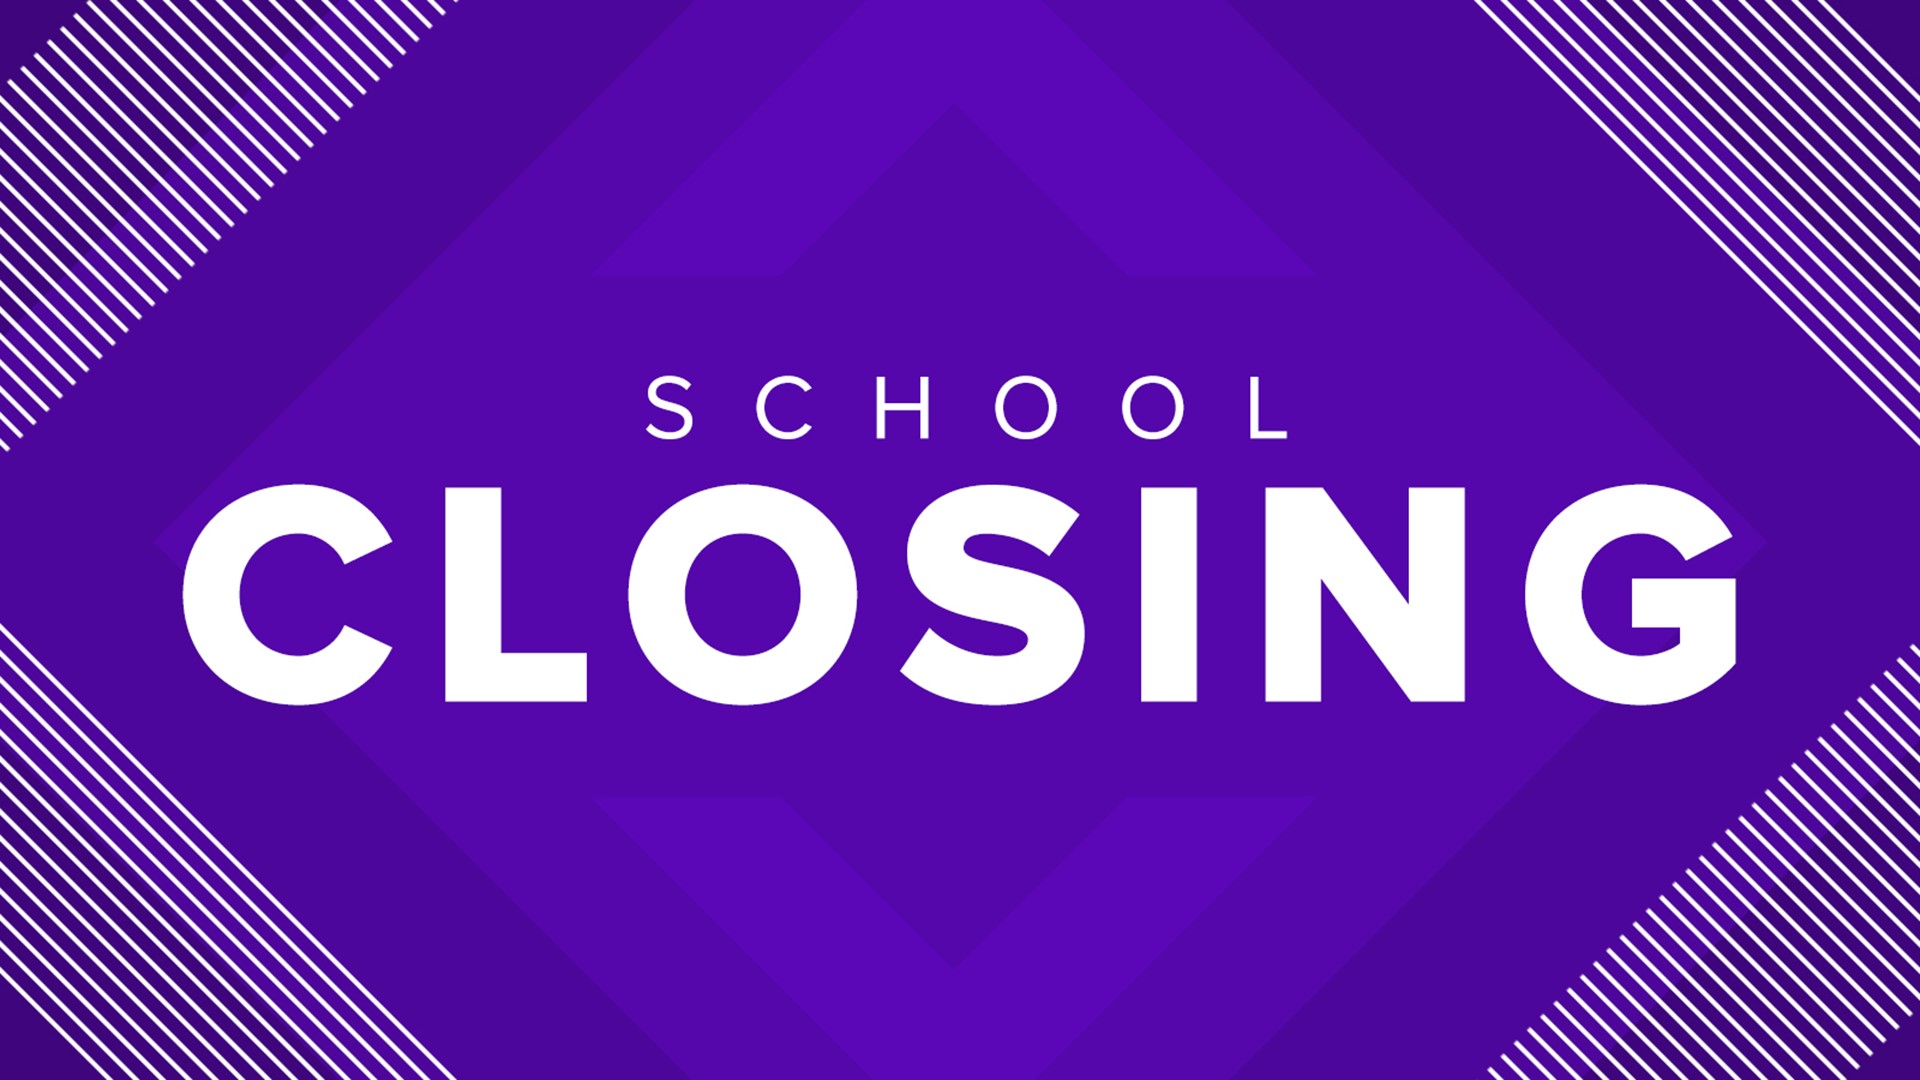 All classes and after-school activities are canceled Thursday at Rockwood's Bowles Elementary.